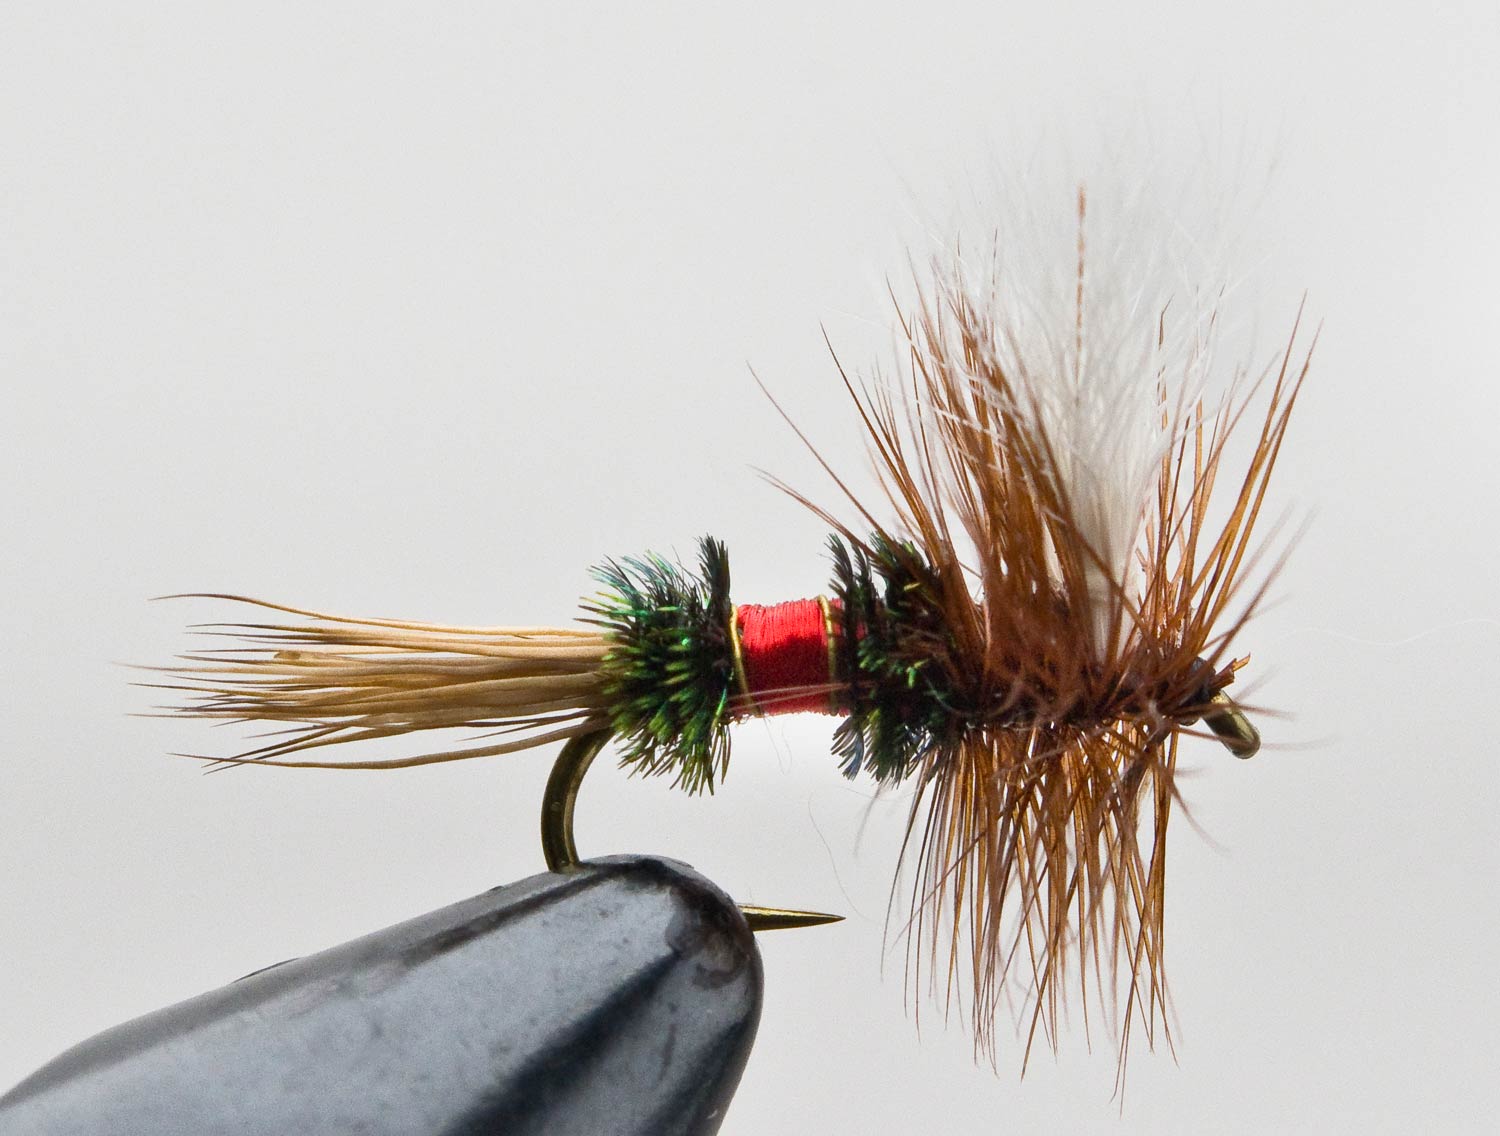 Top 10 Trout Flies For The American West - Fly Fishing, Gink and Gasoline, How to Fly Fish, Trout Fishing, Fly Tying